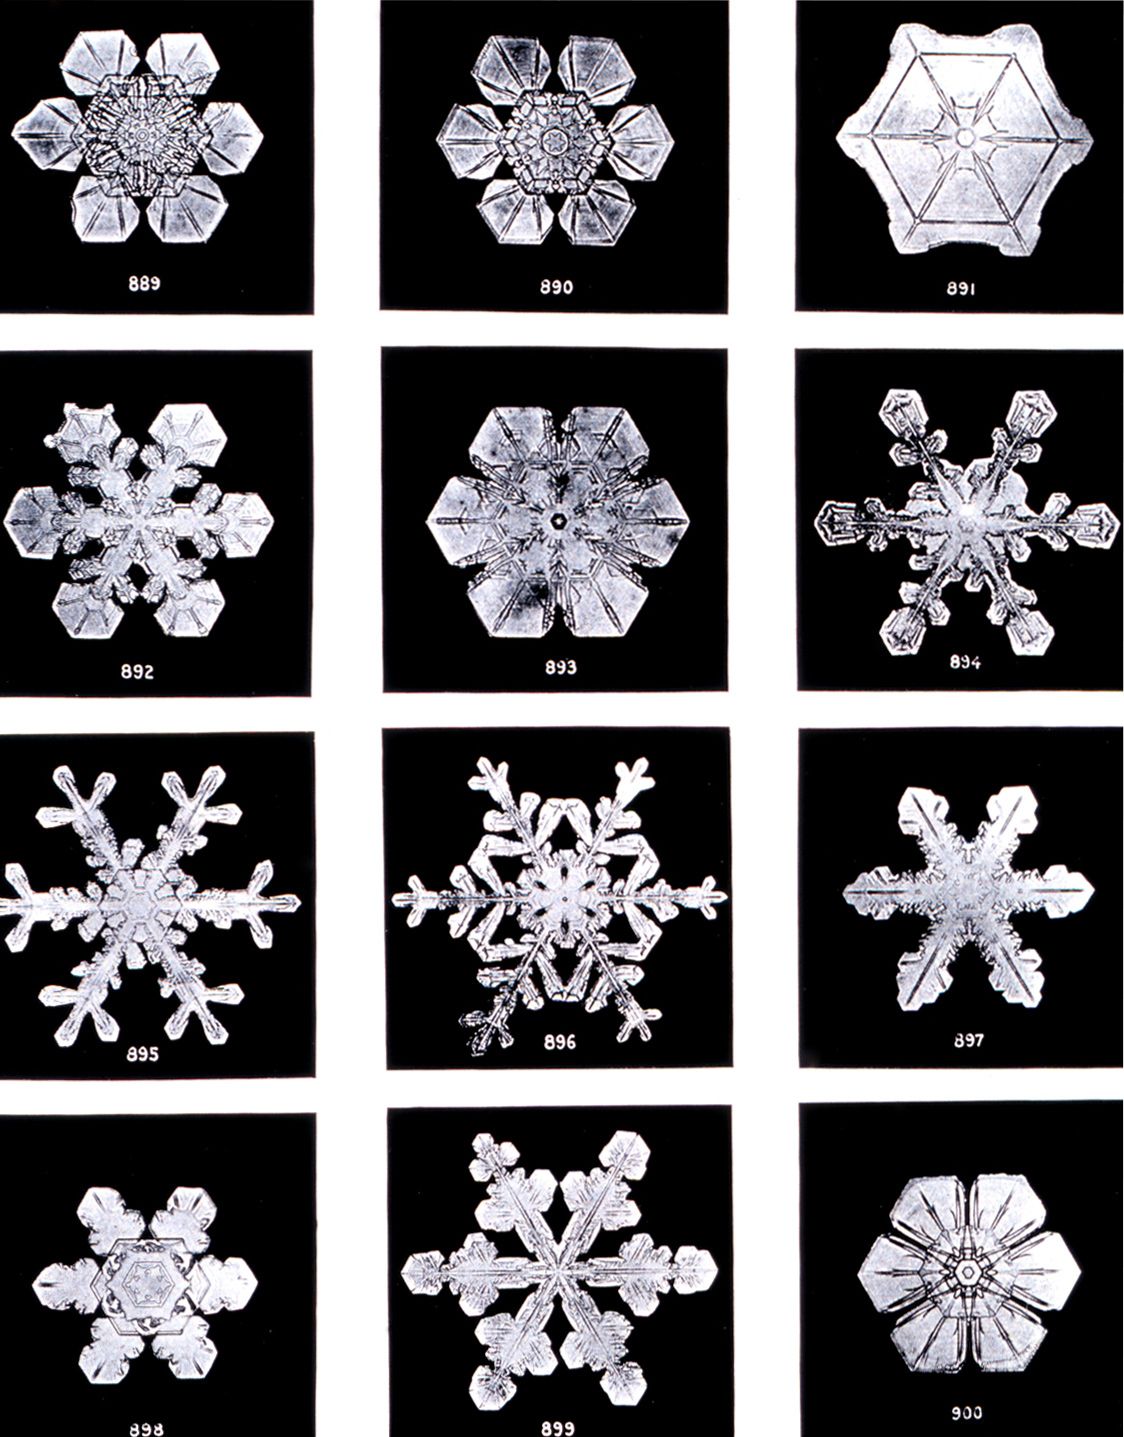 Bentley, Wilson A. Studies among the snow crystals during the winter of 1901-2